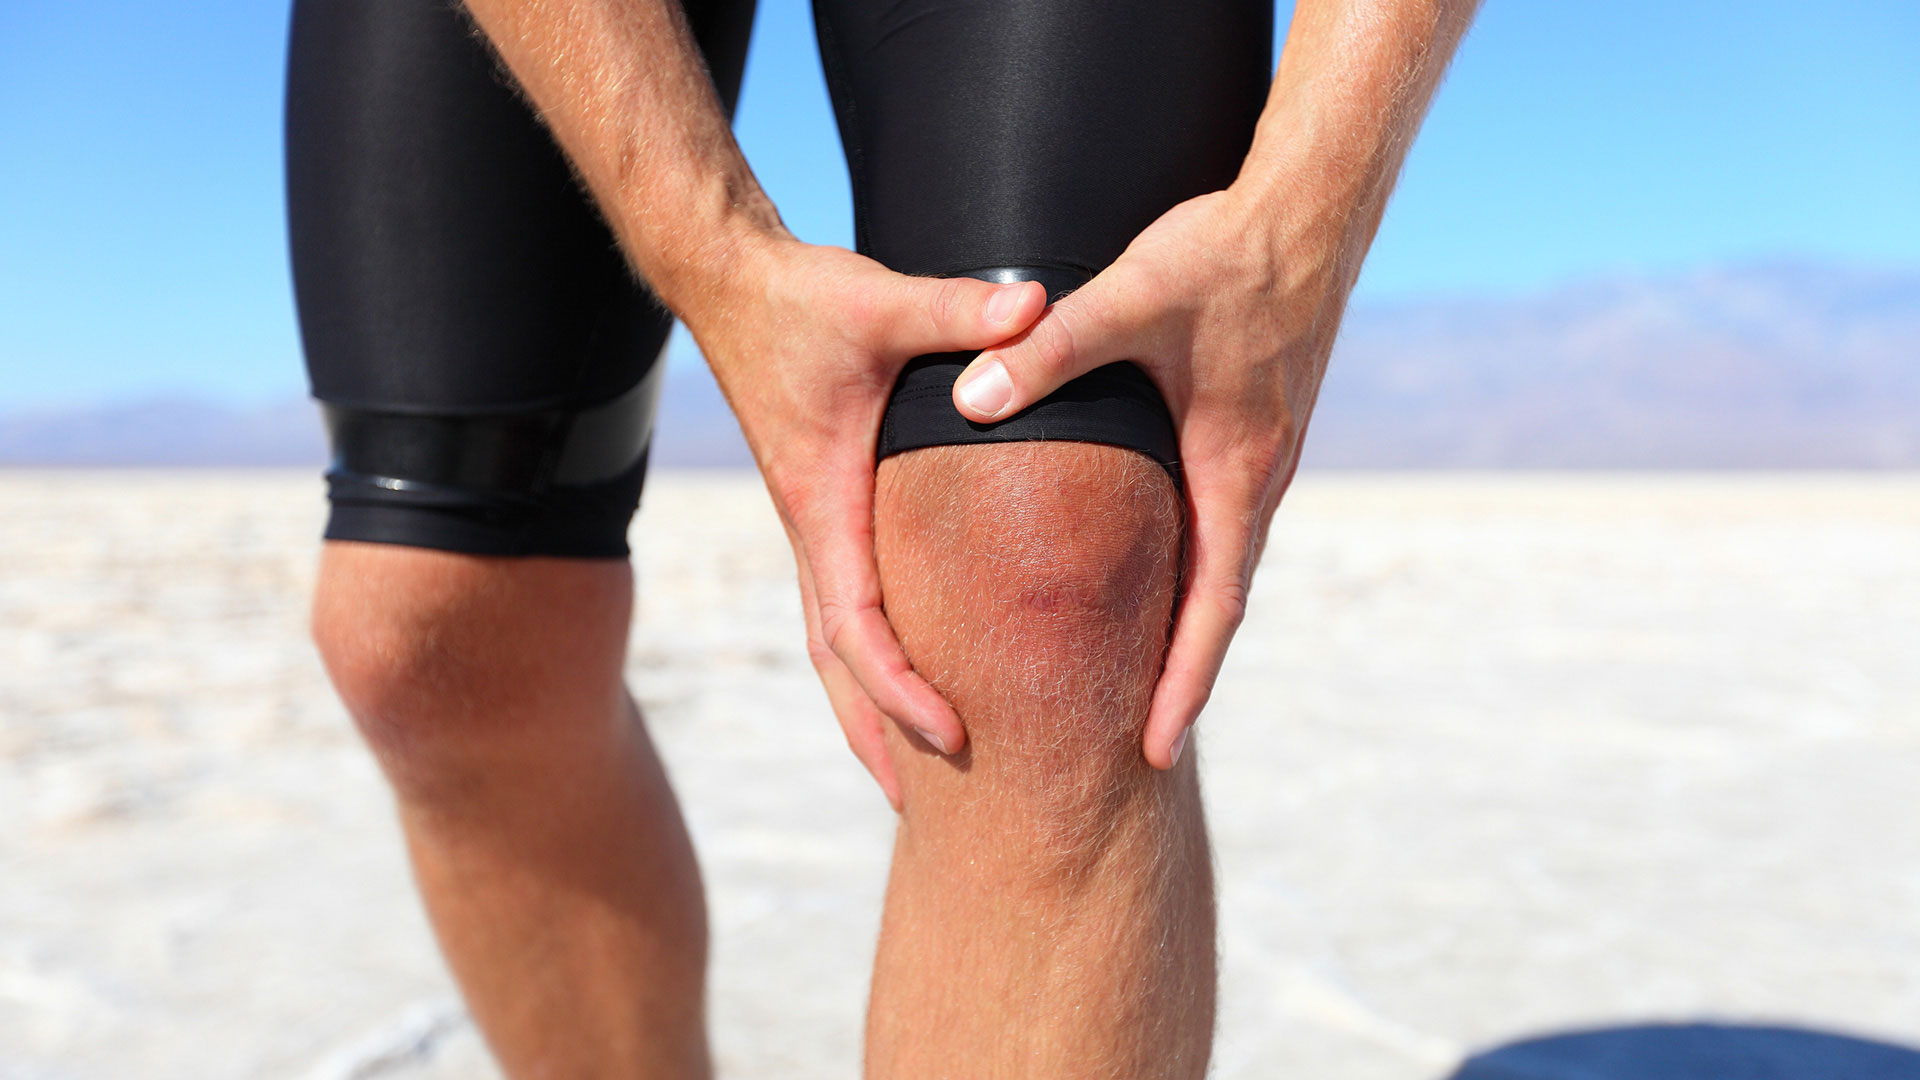 ACL Injury and Chiropractic